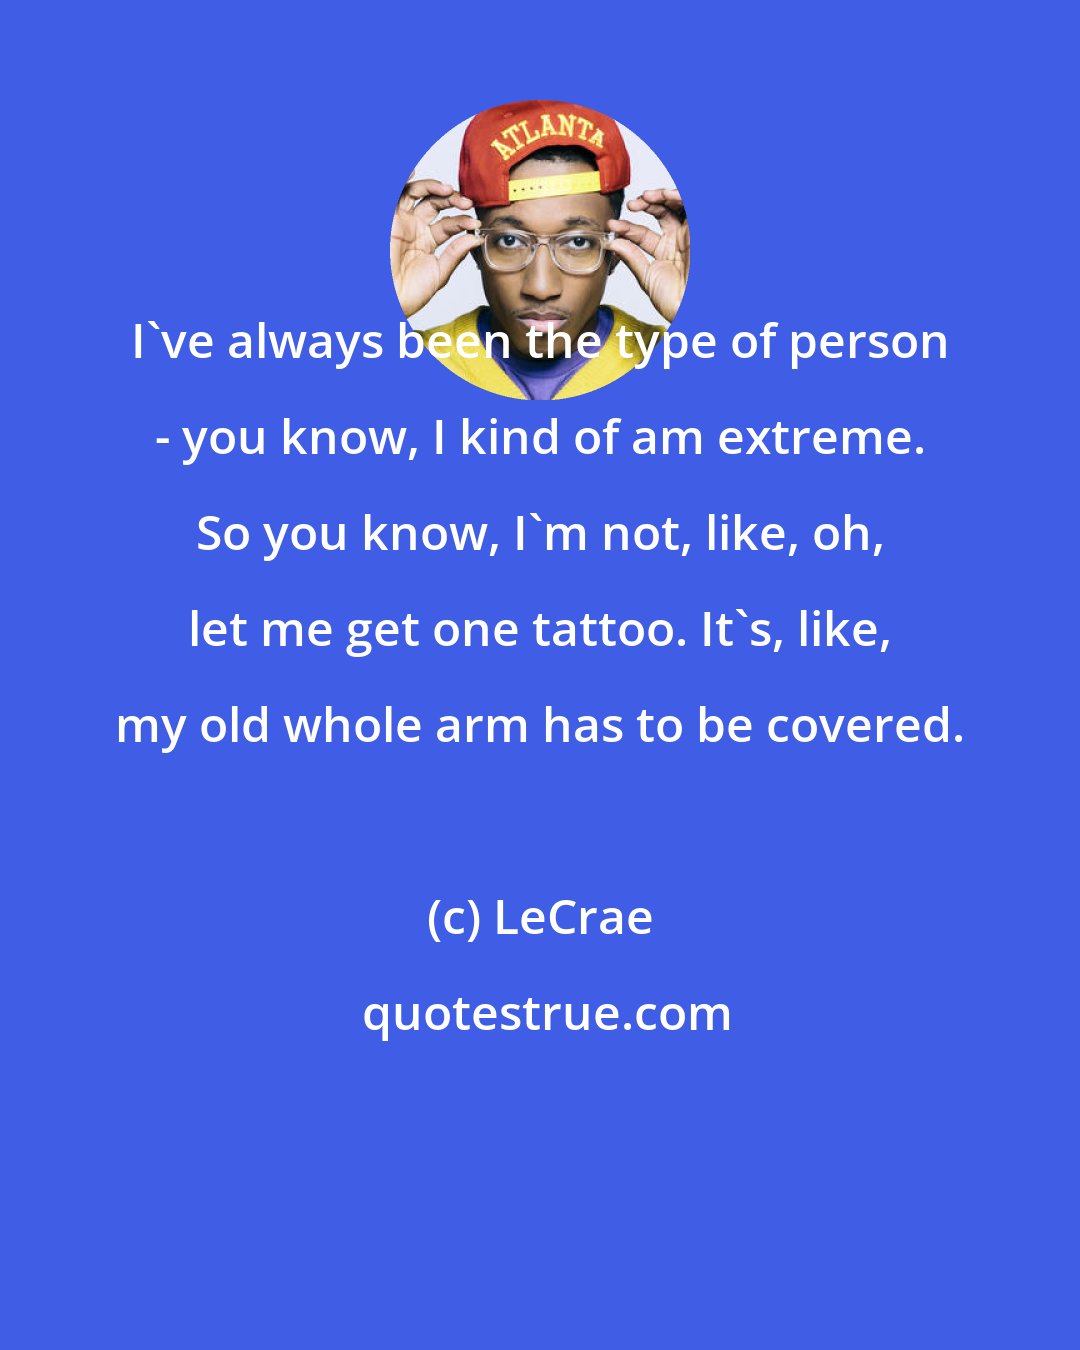 LeCrae: I've always been the type of person - you know, I kind of am extreme. So you know, I'm not, like, oh, let me get one tattoo. It's, like, my old whole arm has to be covered.